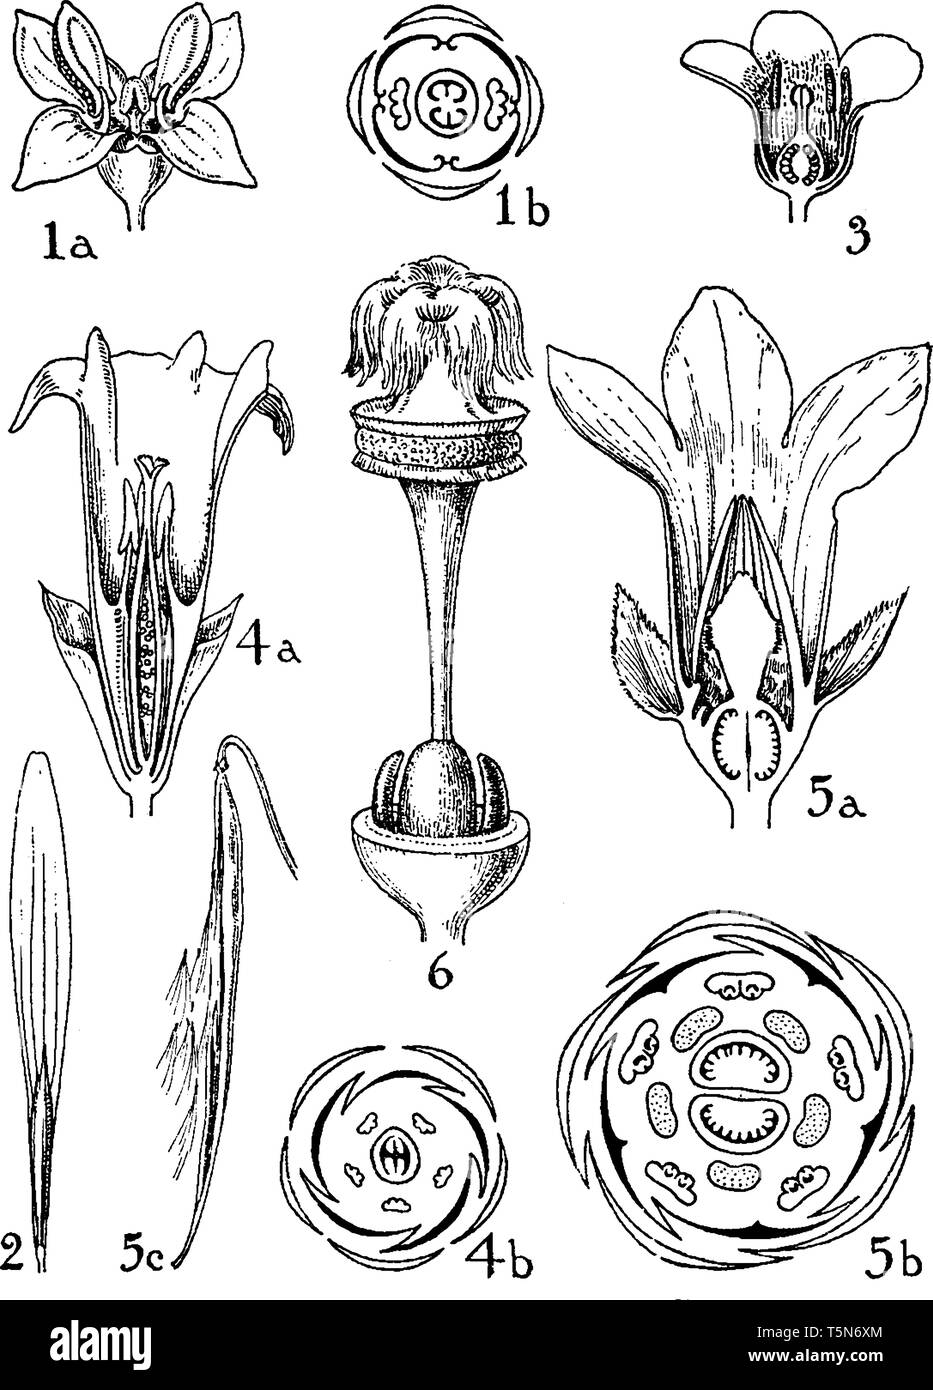 as shown in picture are the flowers and fruits of the orders oleaceae, loganiaceae, gentianaceae, and apocynaceae. These are illustrated as olea, frax Stock Vector